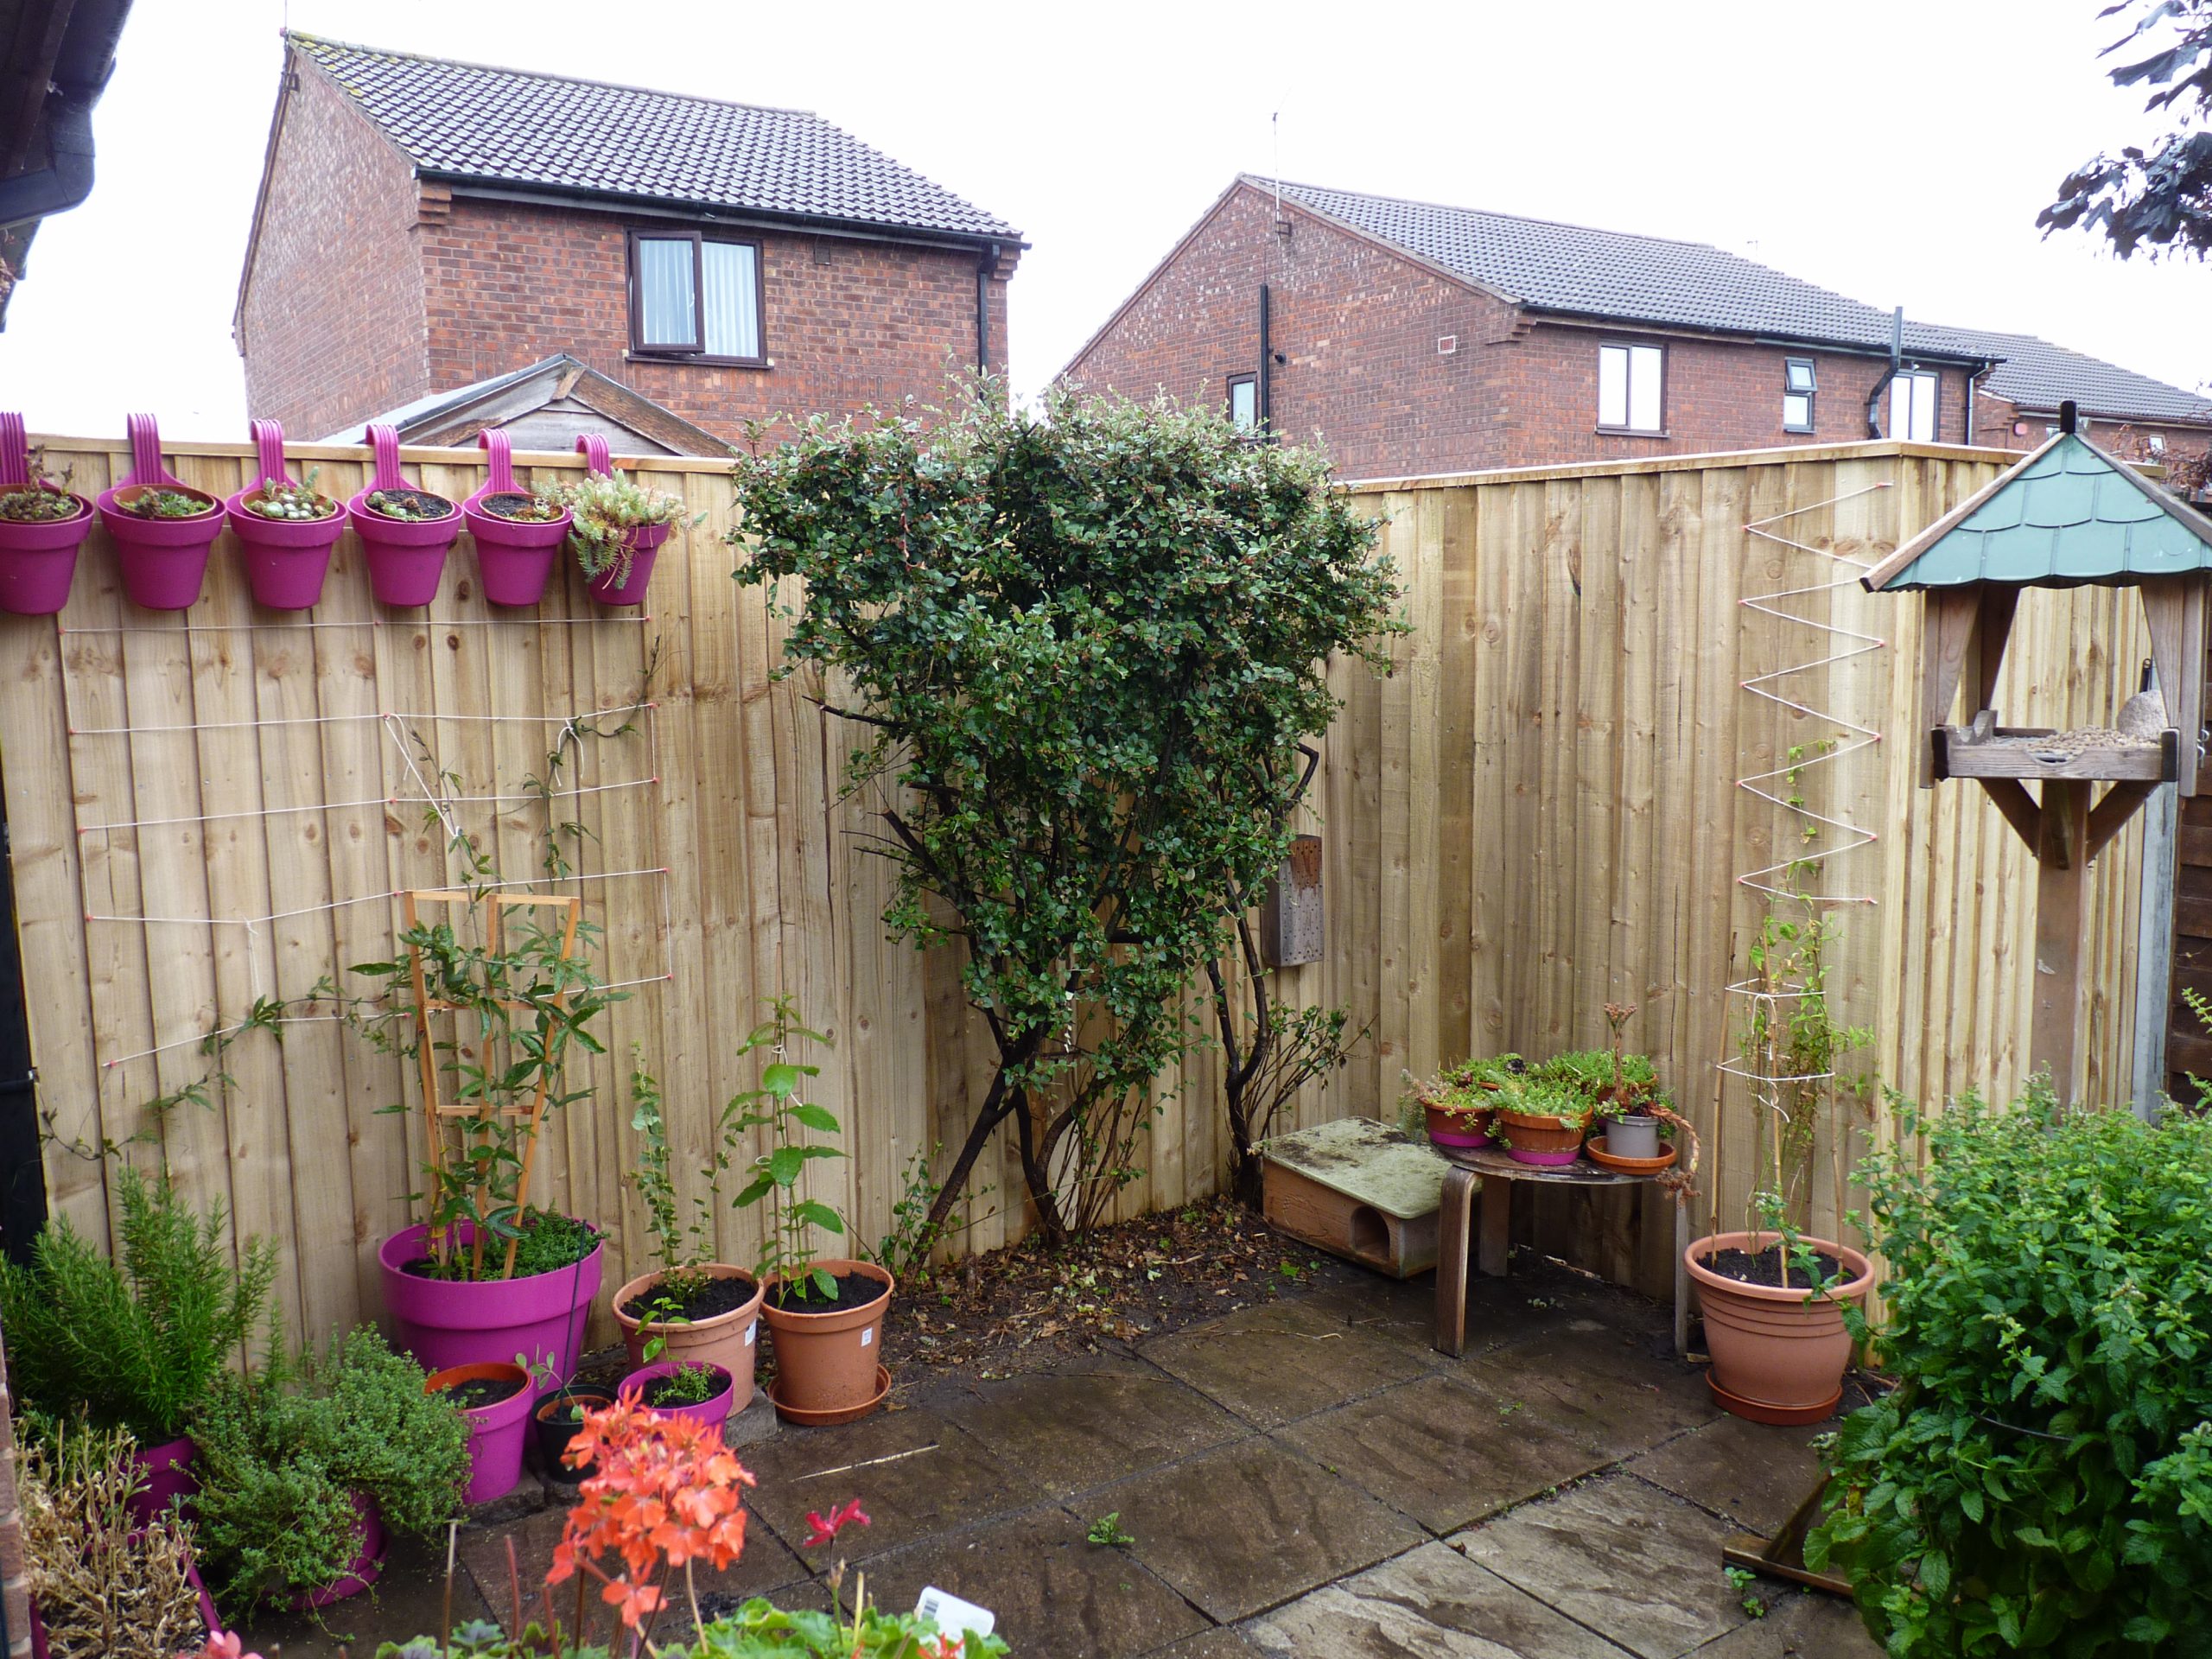 Two wooden fence panels with greenery, potted plants and other garden items.